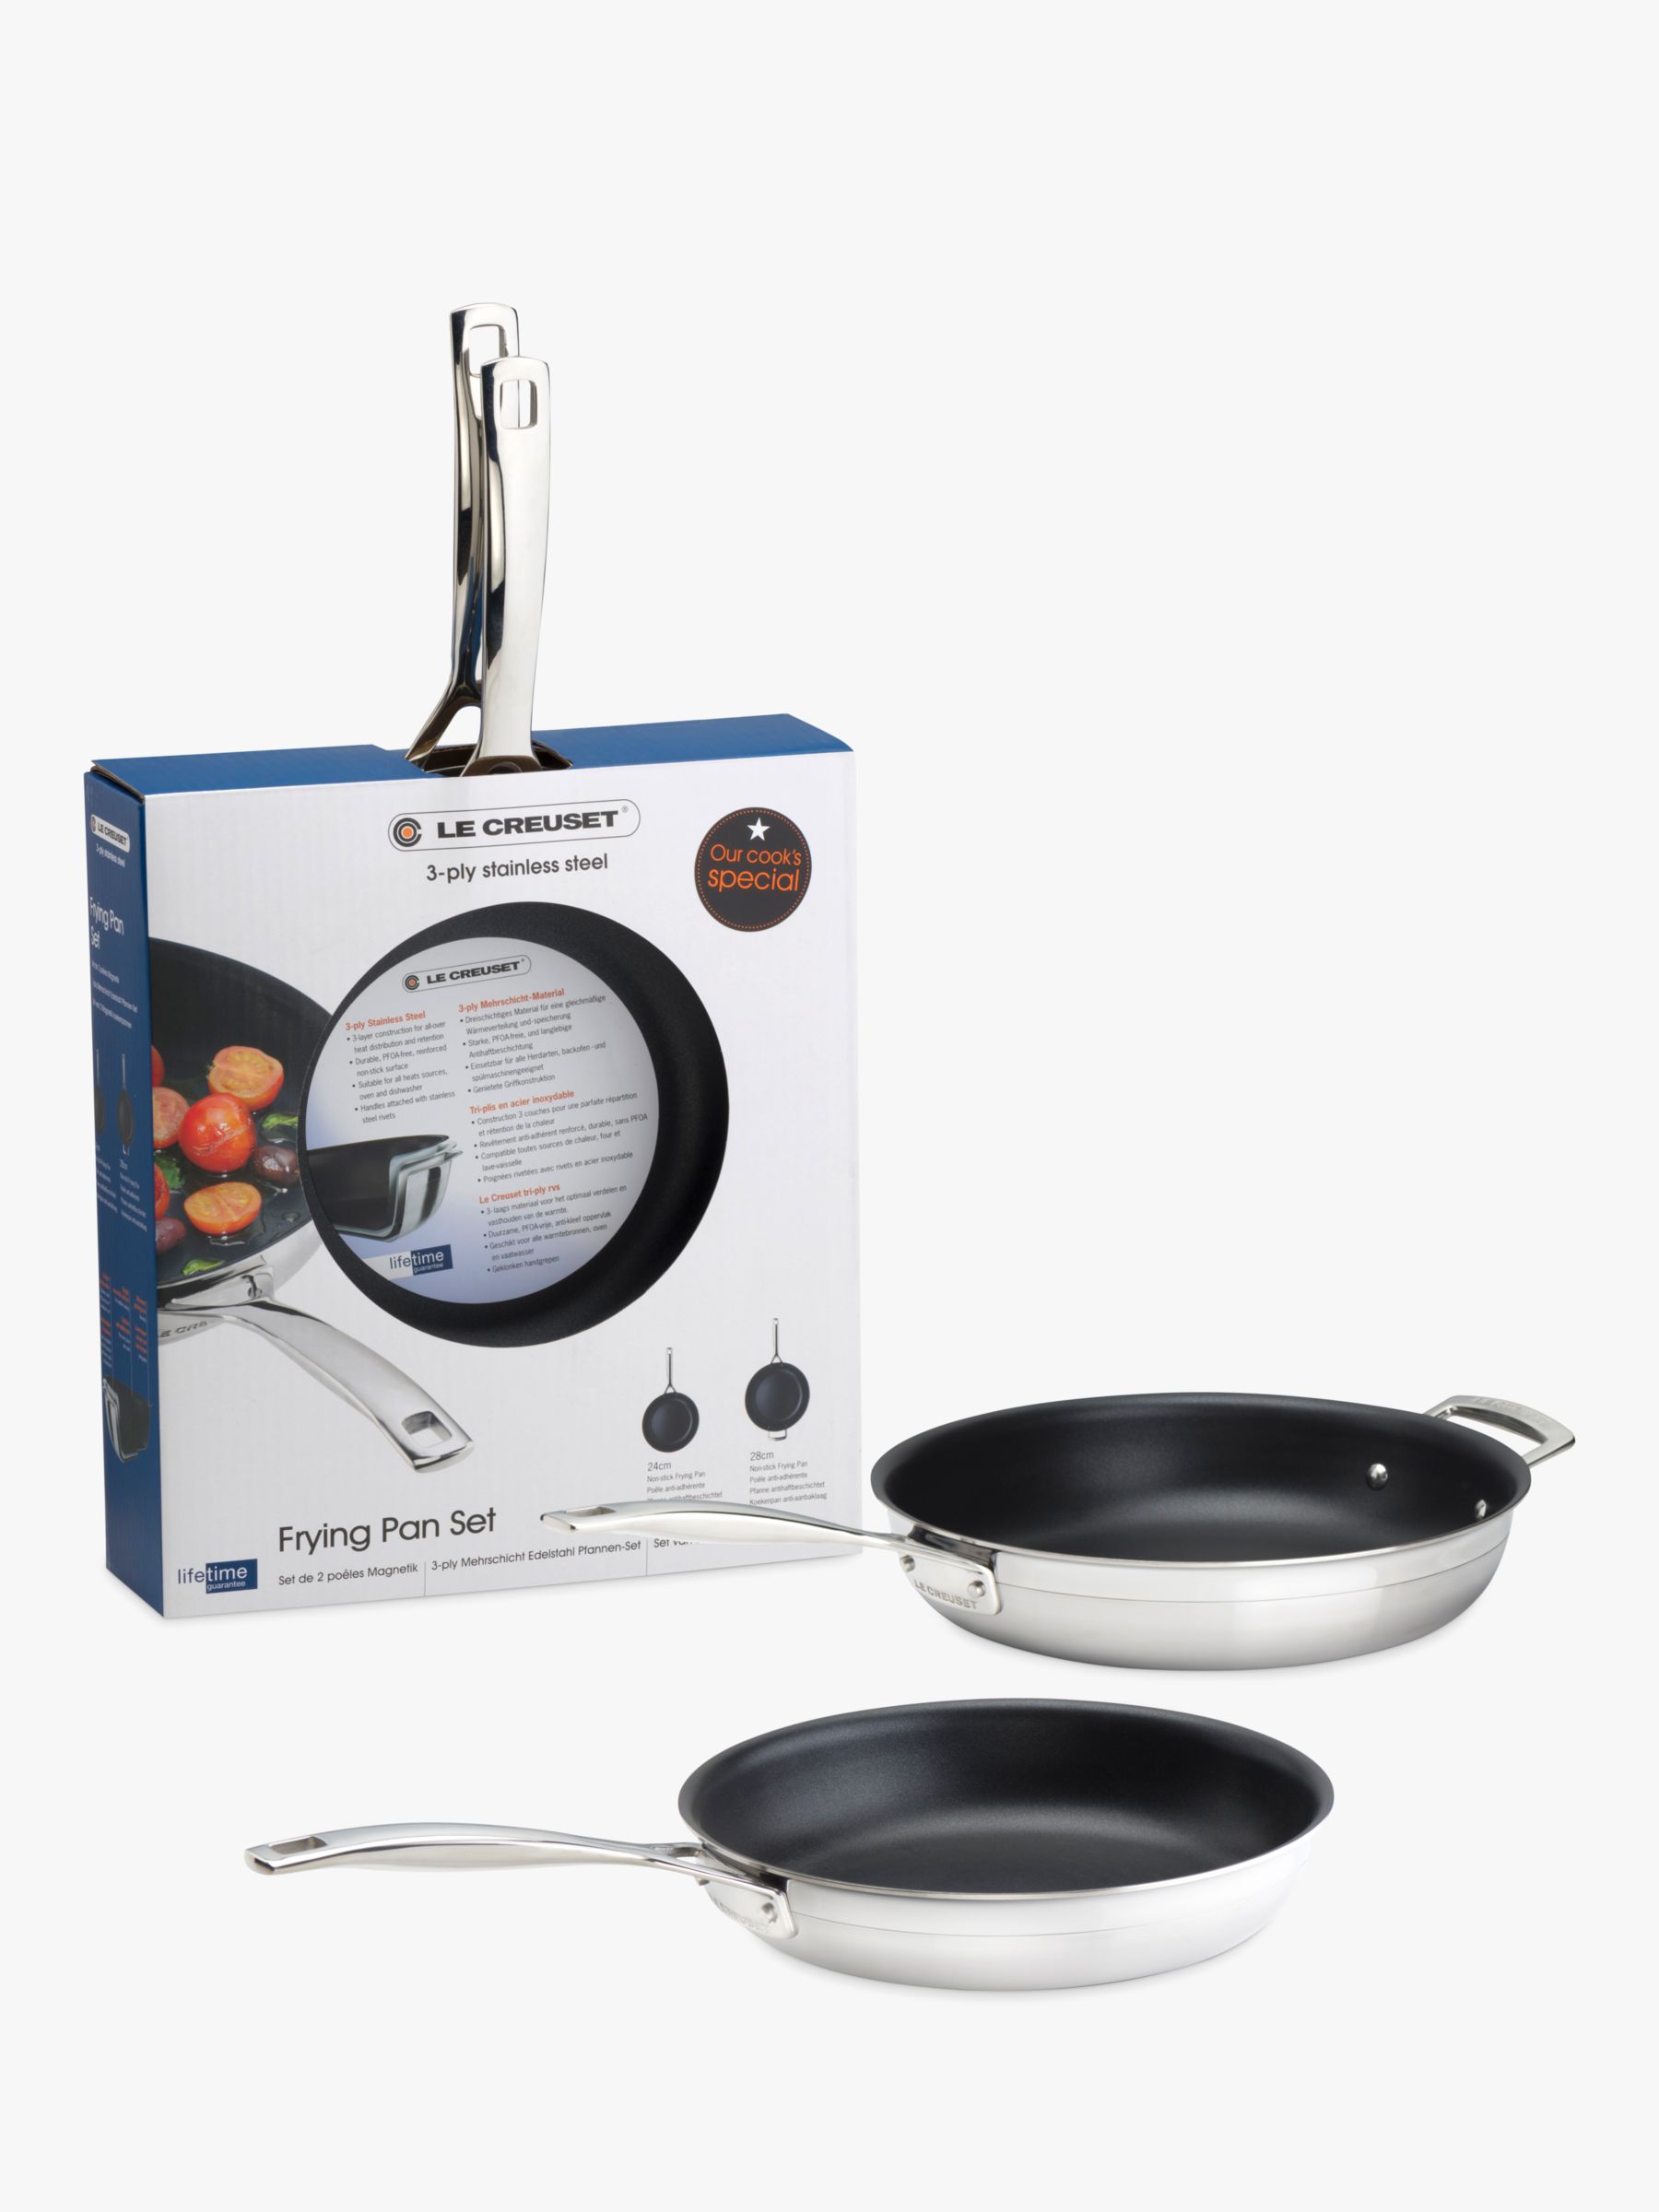 Le Creuset 2 Piece Nonstick Fry Pan Set - Stainless Steel